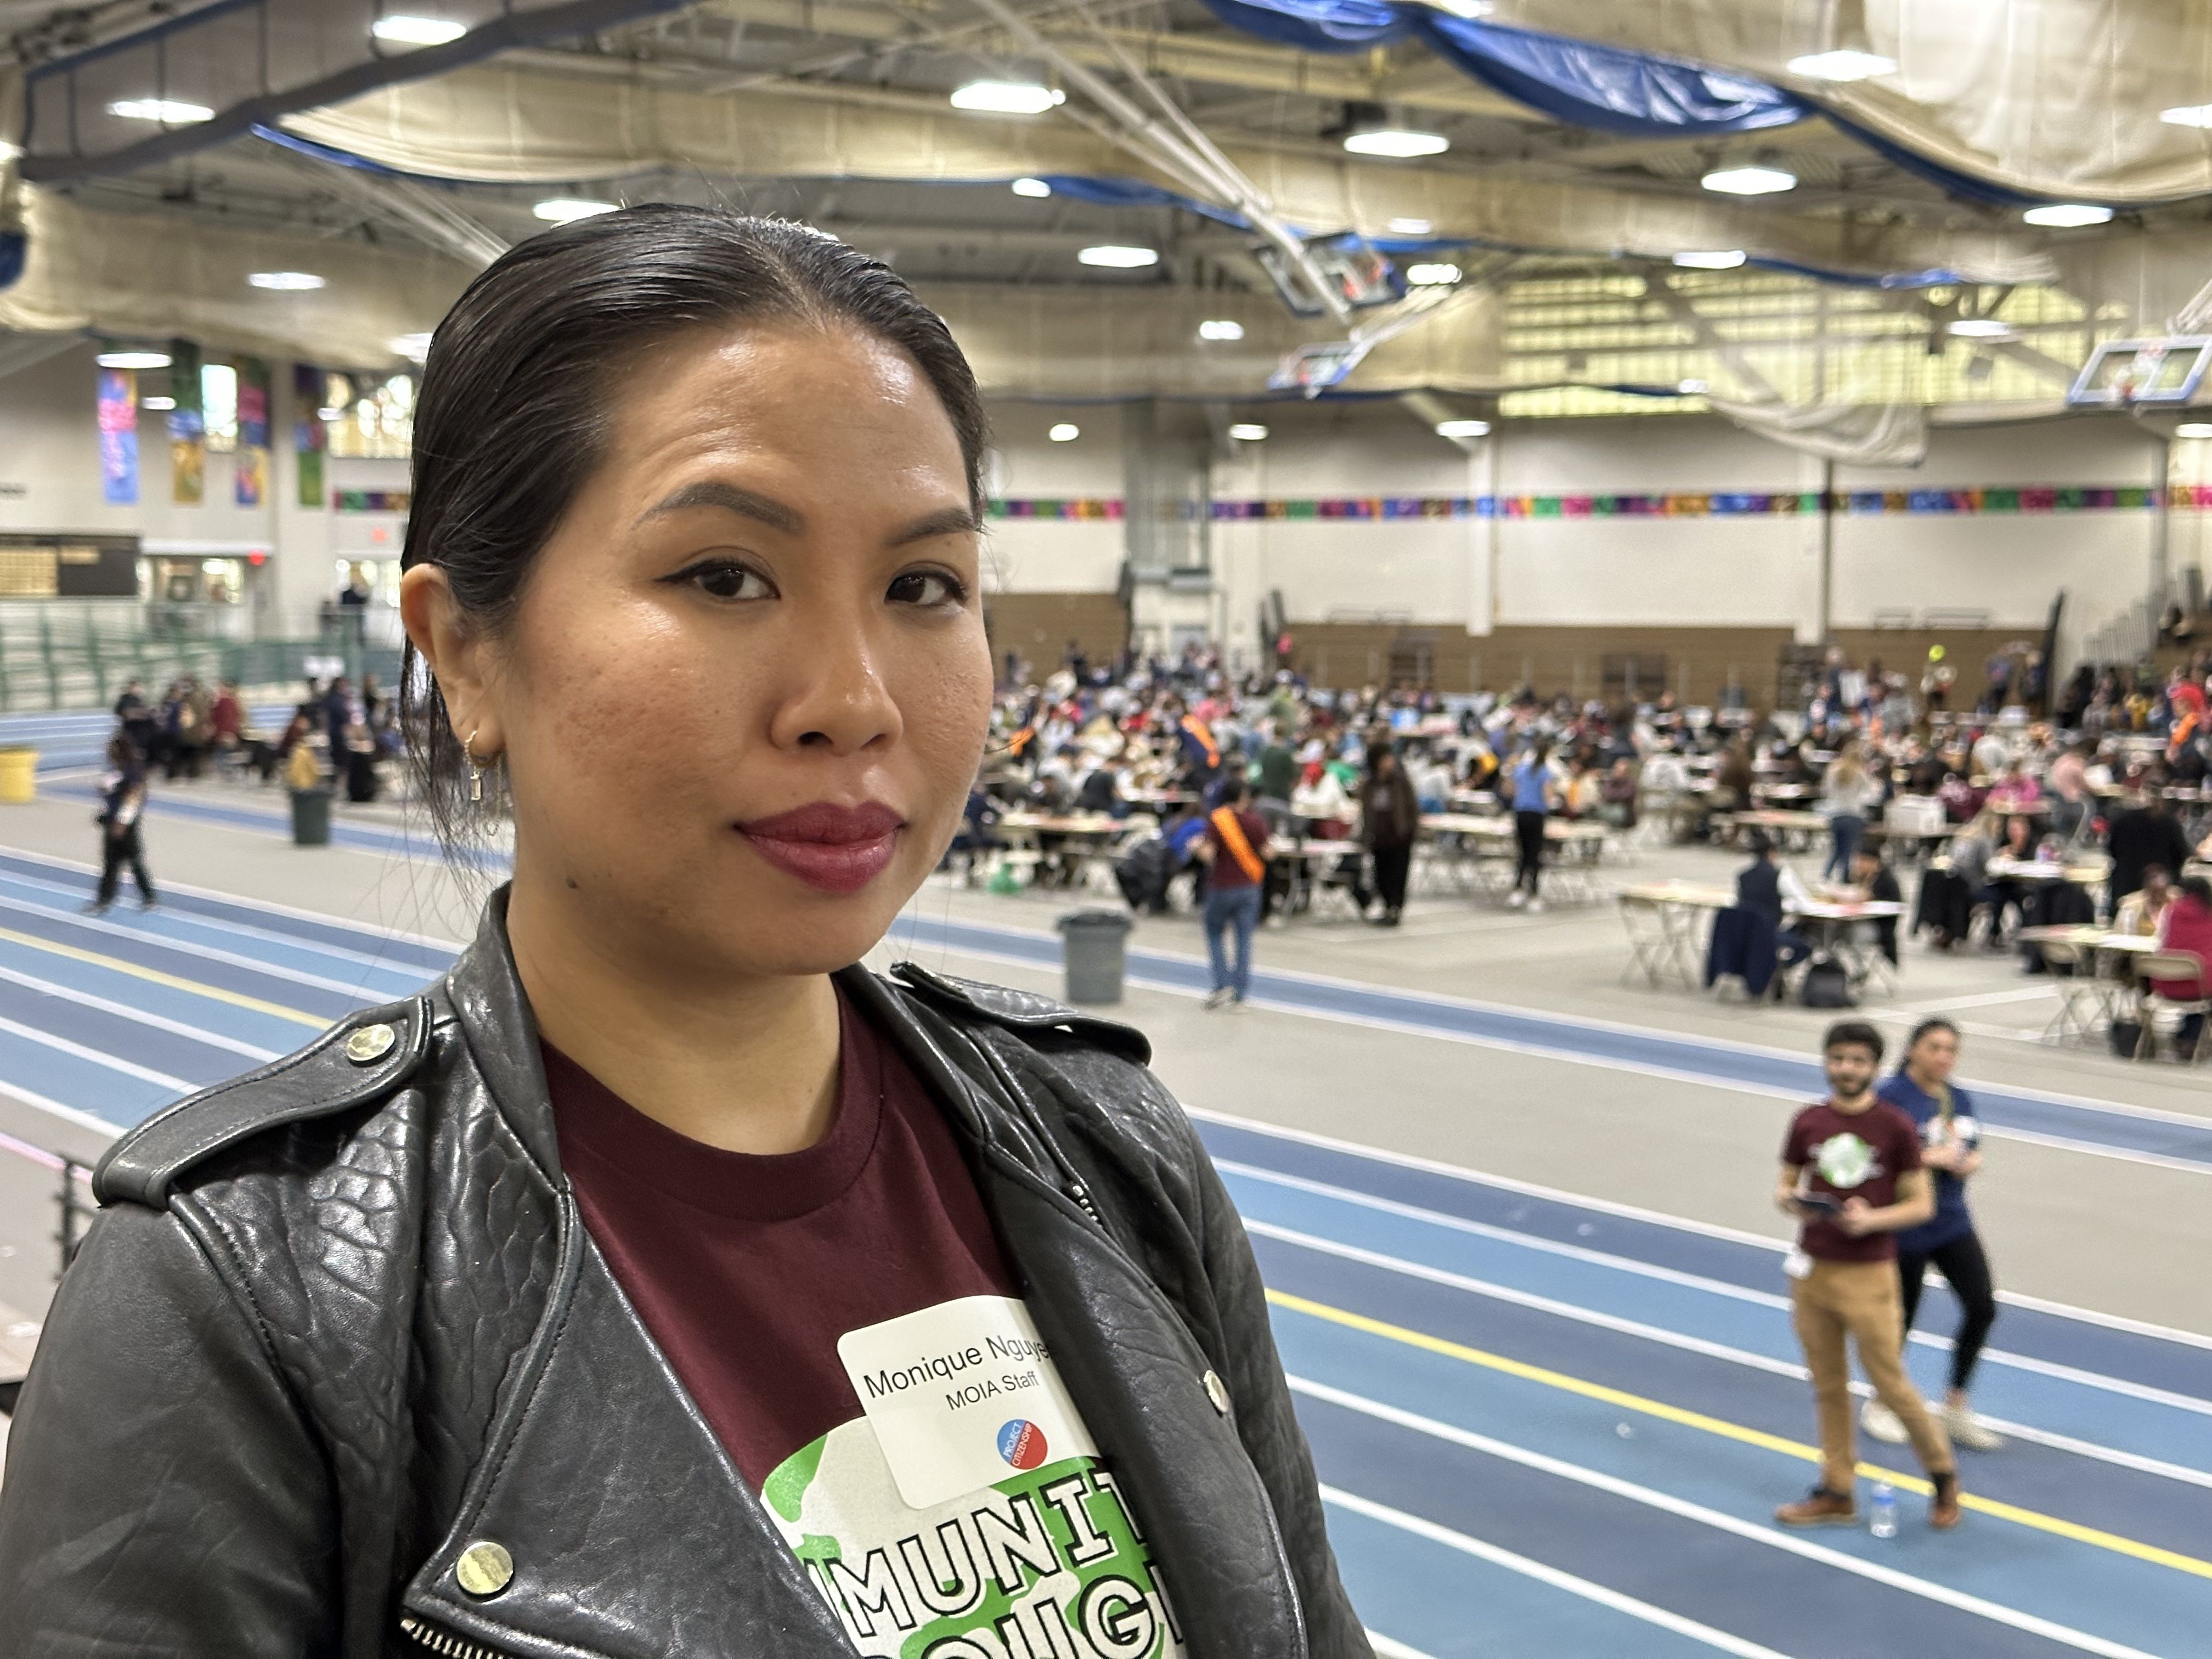 Monique Nguyen, executive director of the city's office for immigrant advancement, stands in the bleachers. The citizenship clinic is visible in the background.